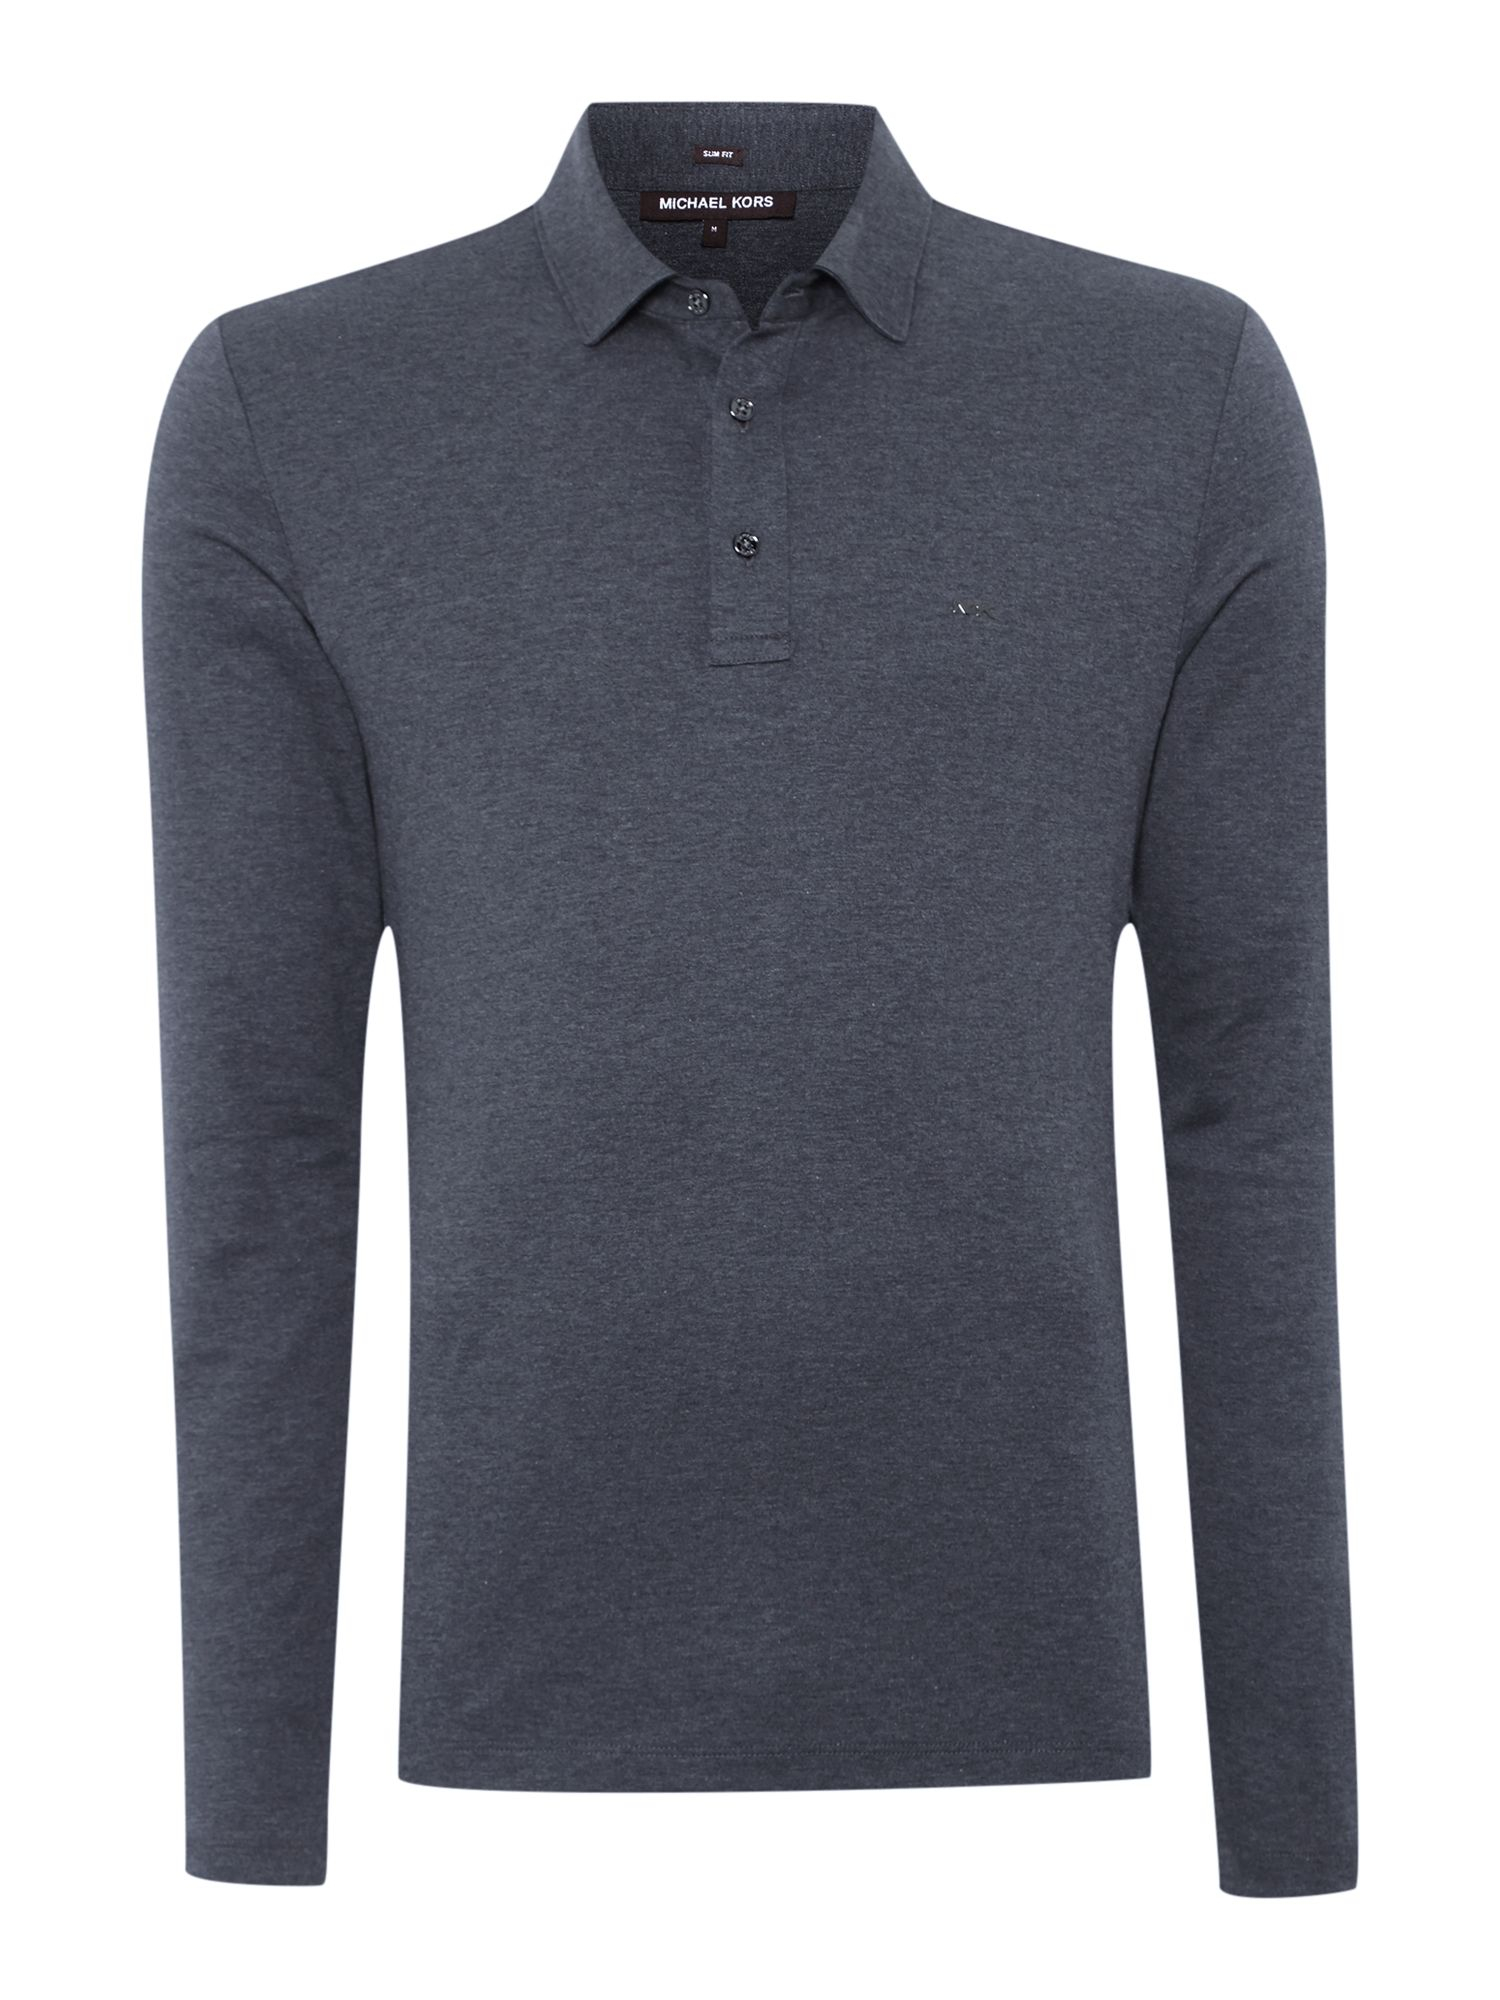 Michael Kors Slim Fit Long Sleeve Polo Shirt in Charcoal (Gray) for Men ...